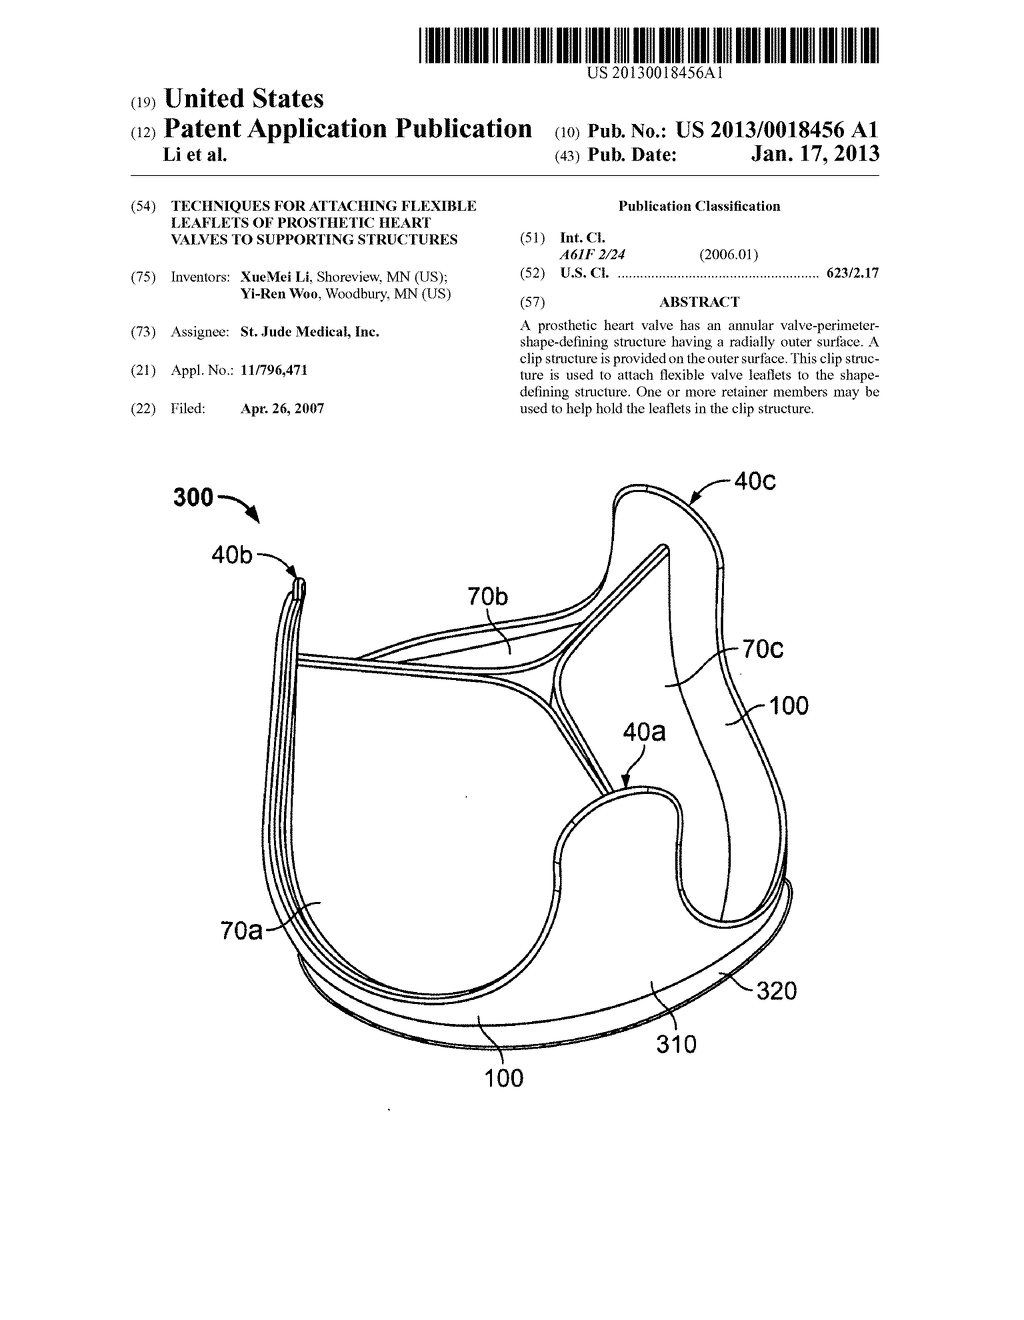 TECHNIQUES FOR ATTACHING FLEXIBLE LEAFLETS OF PROSTHETIC HEART VALVES TO     SUPPORTING STRUCTURESAANM Li; XueMeiAACI ShoreviewAAST MNAACO USAAGP Li; XueMei Shoreview MN USAANM Woo; Yi-RenAACI WoodburyAAST MNAACO USAAGP Woo; Yi-Ren Woodbury MN US - diagram, schematic, and image 01